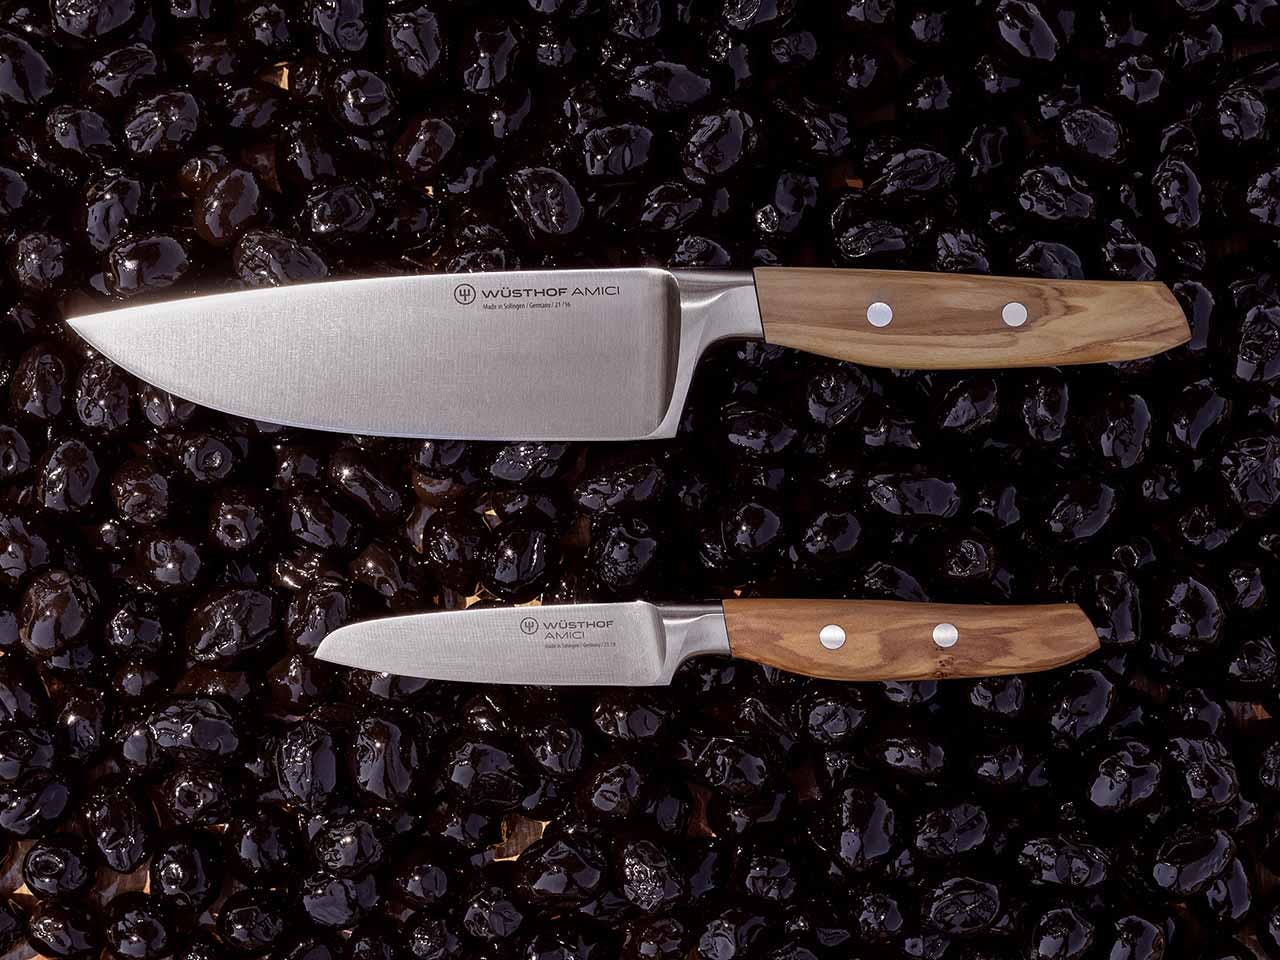 Amici 8" chef's knife and 2.5" paring knife on a bed of black olives